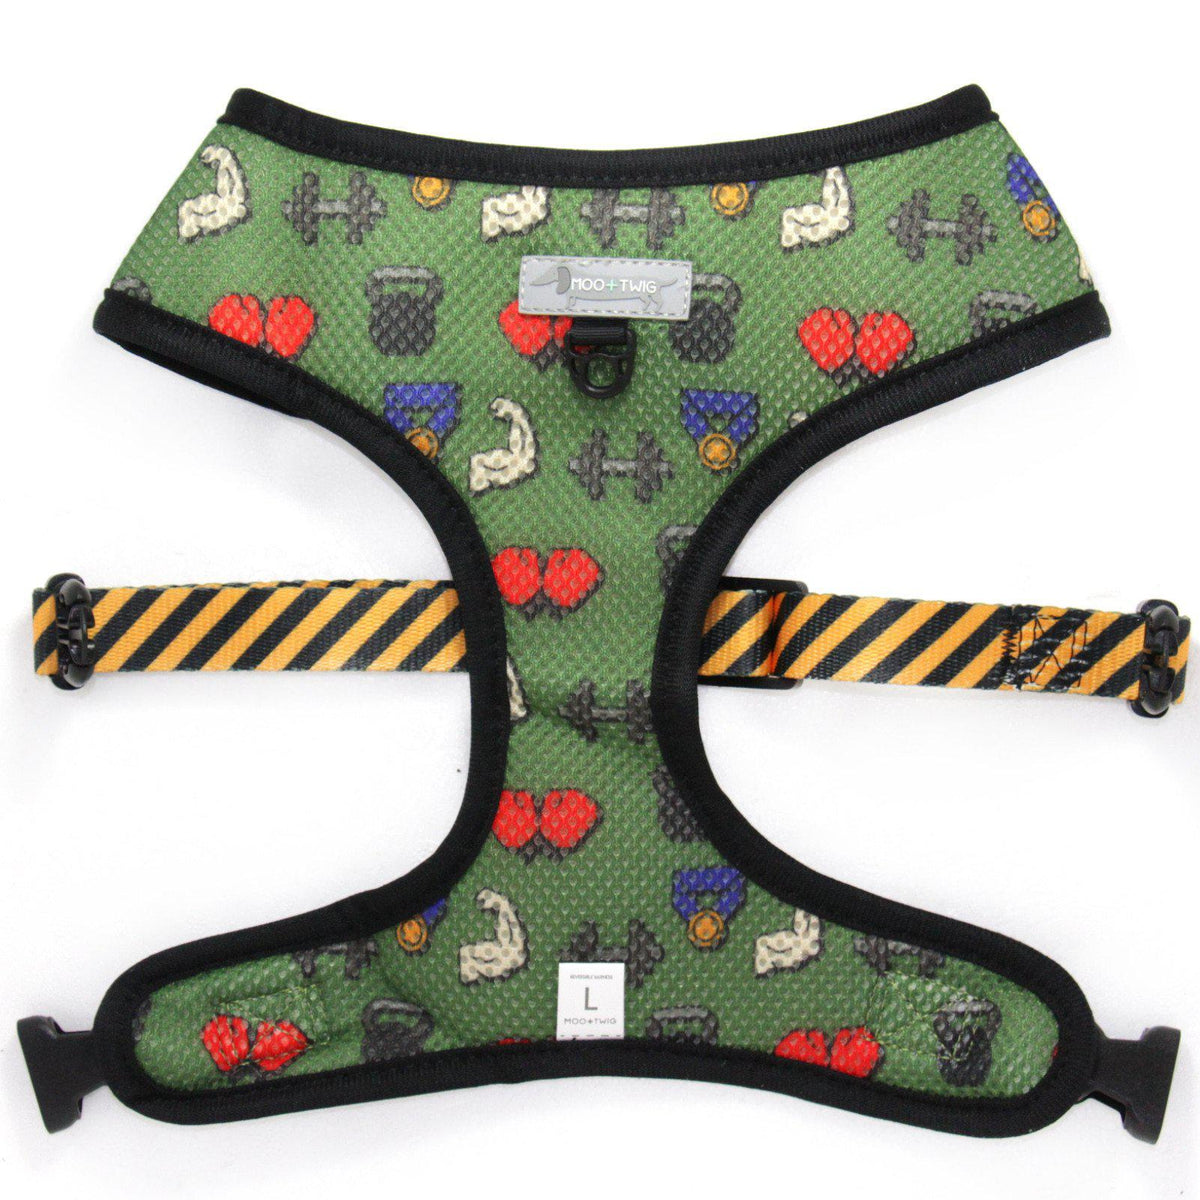 Reversible Dog Harness with signs, gym junkie, warnings, barbells, barbed wire. Funny dog harness. 